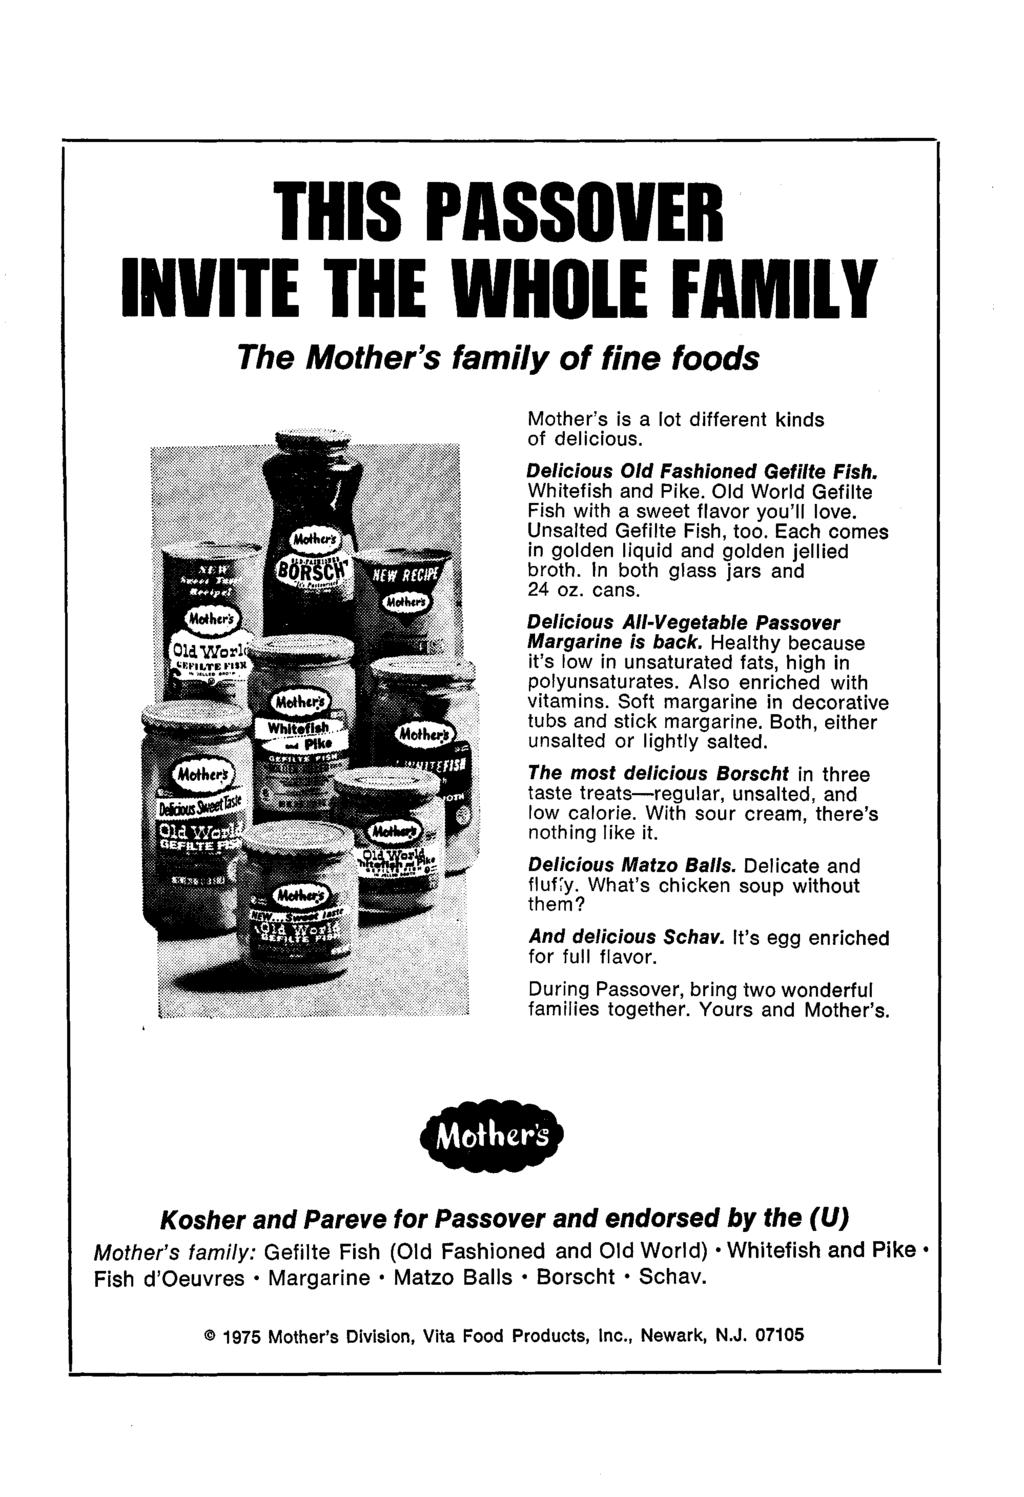 THIS PASSOVER INVITE THE WHOLE FAMILY The Mother s family of fine foods Mother s is a lot different kinds of delicious. Delicious Old Fashioned Gefilte Fish. Whitefish and Pike.